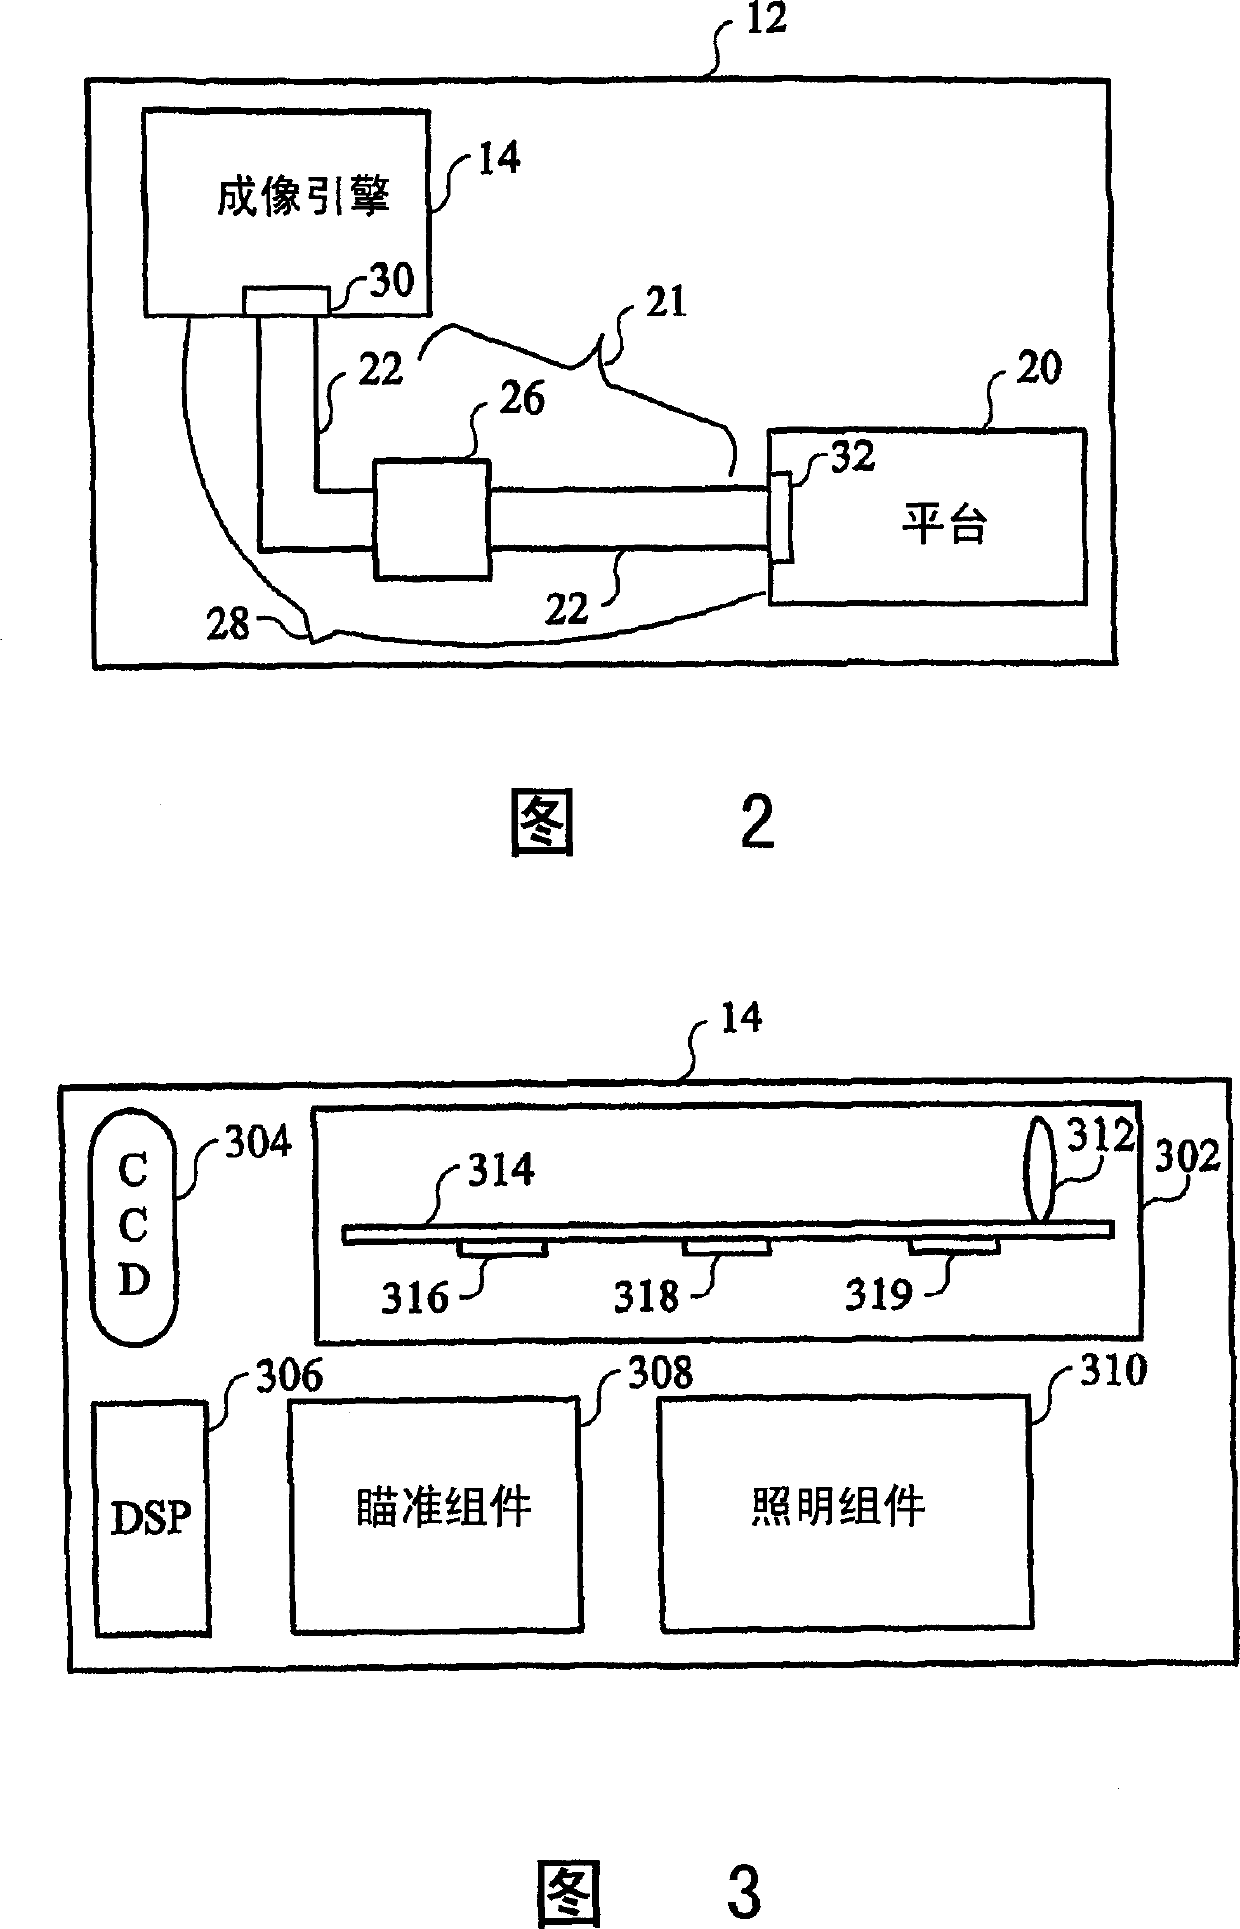 Optical code reader with autofocus and interface unit